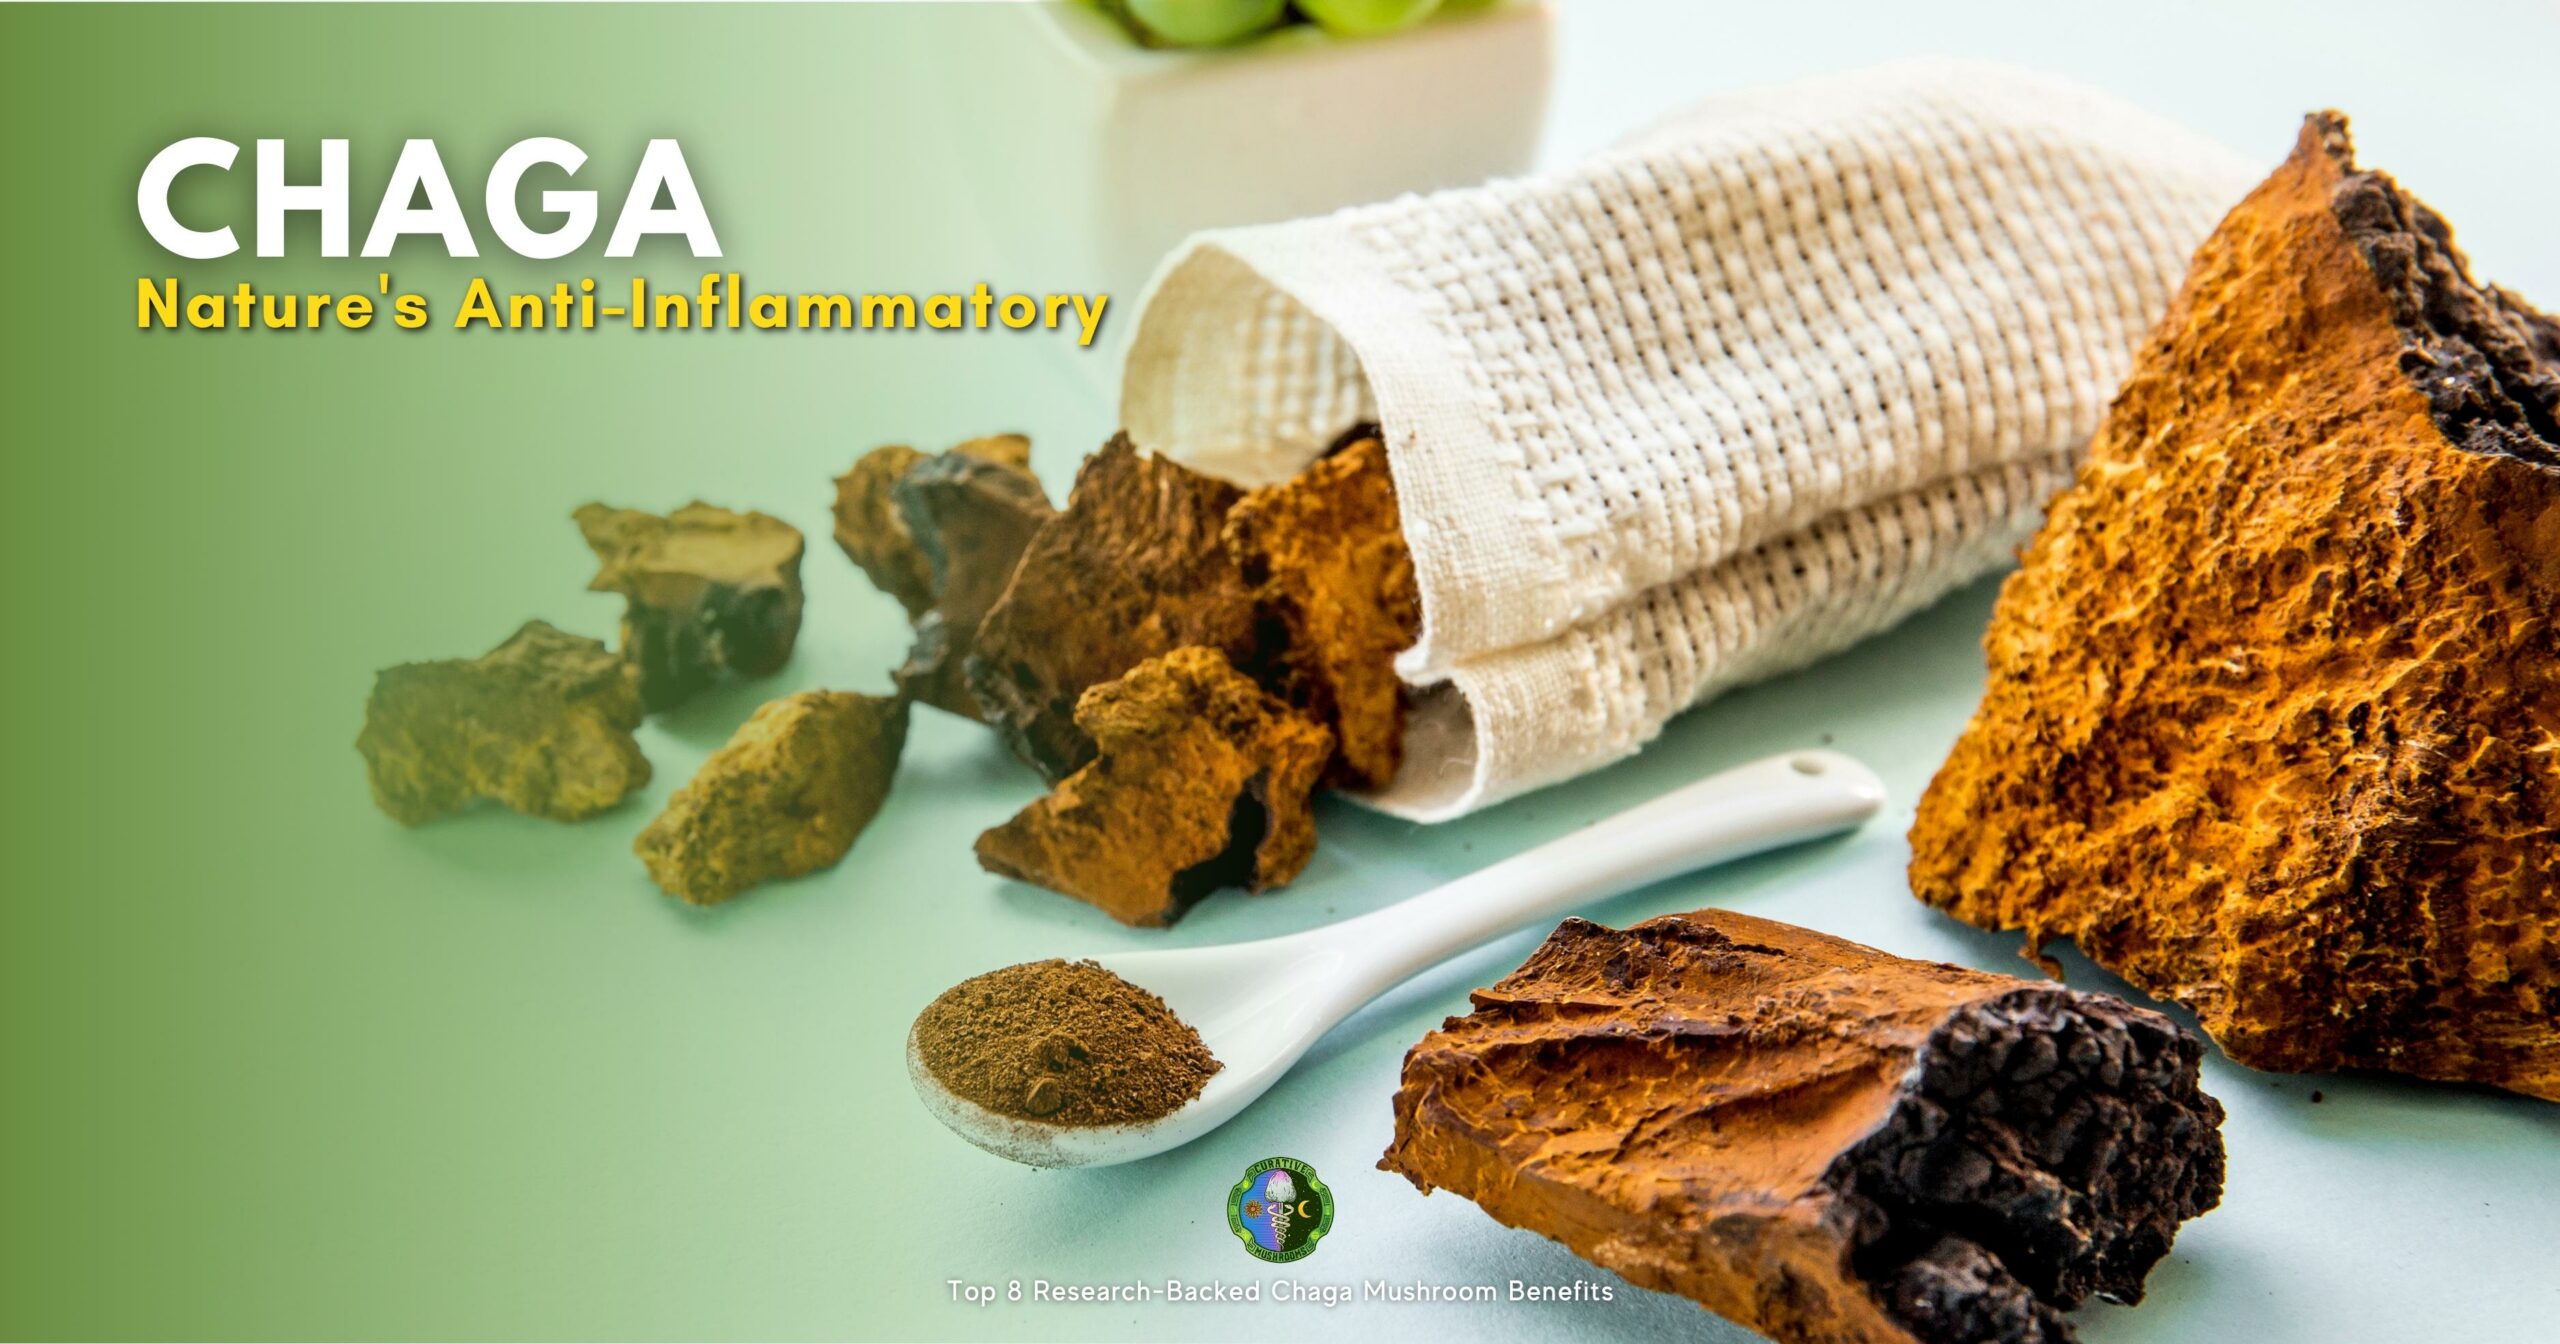 Top 8 Research-Backed Chaga Mushroom Benefits - Anti-inflammatory - triterpenes and polysaccharides - inhibit the production of inflammatory molecules - reduce inflammation in human colon cells